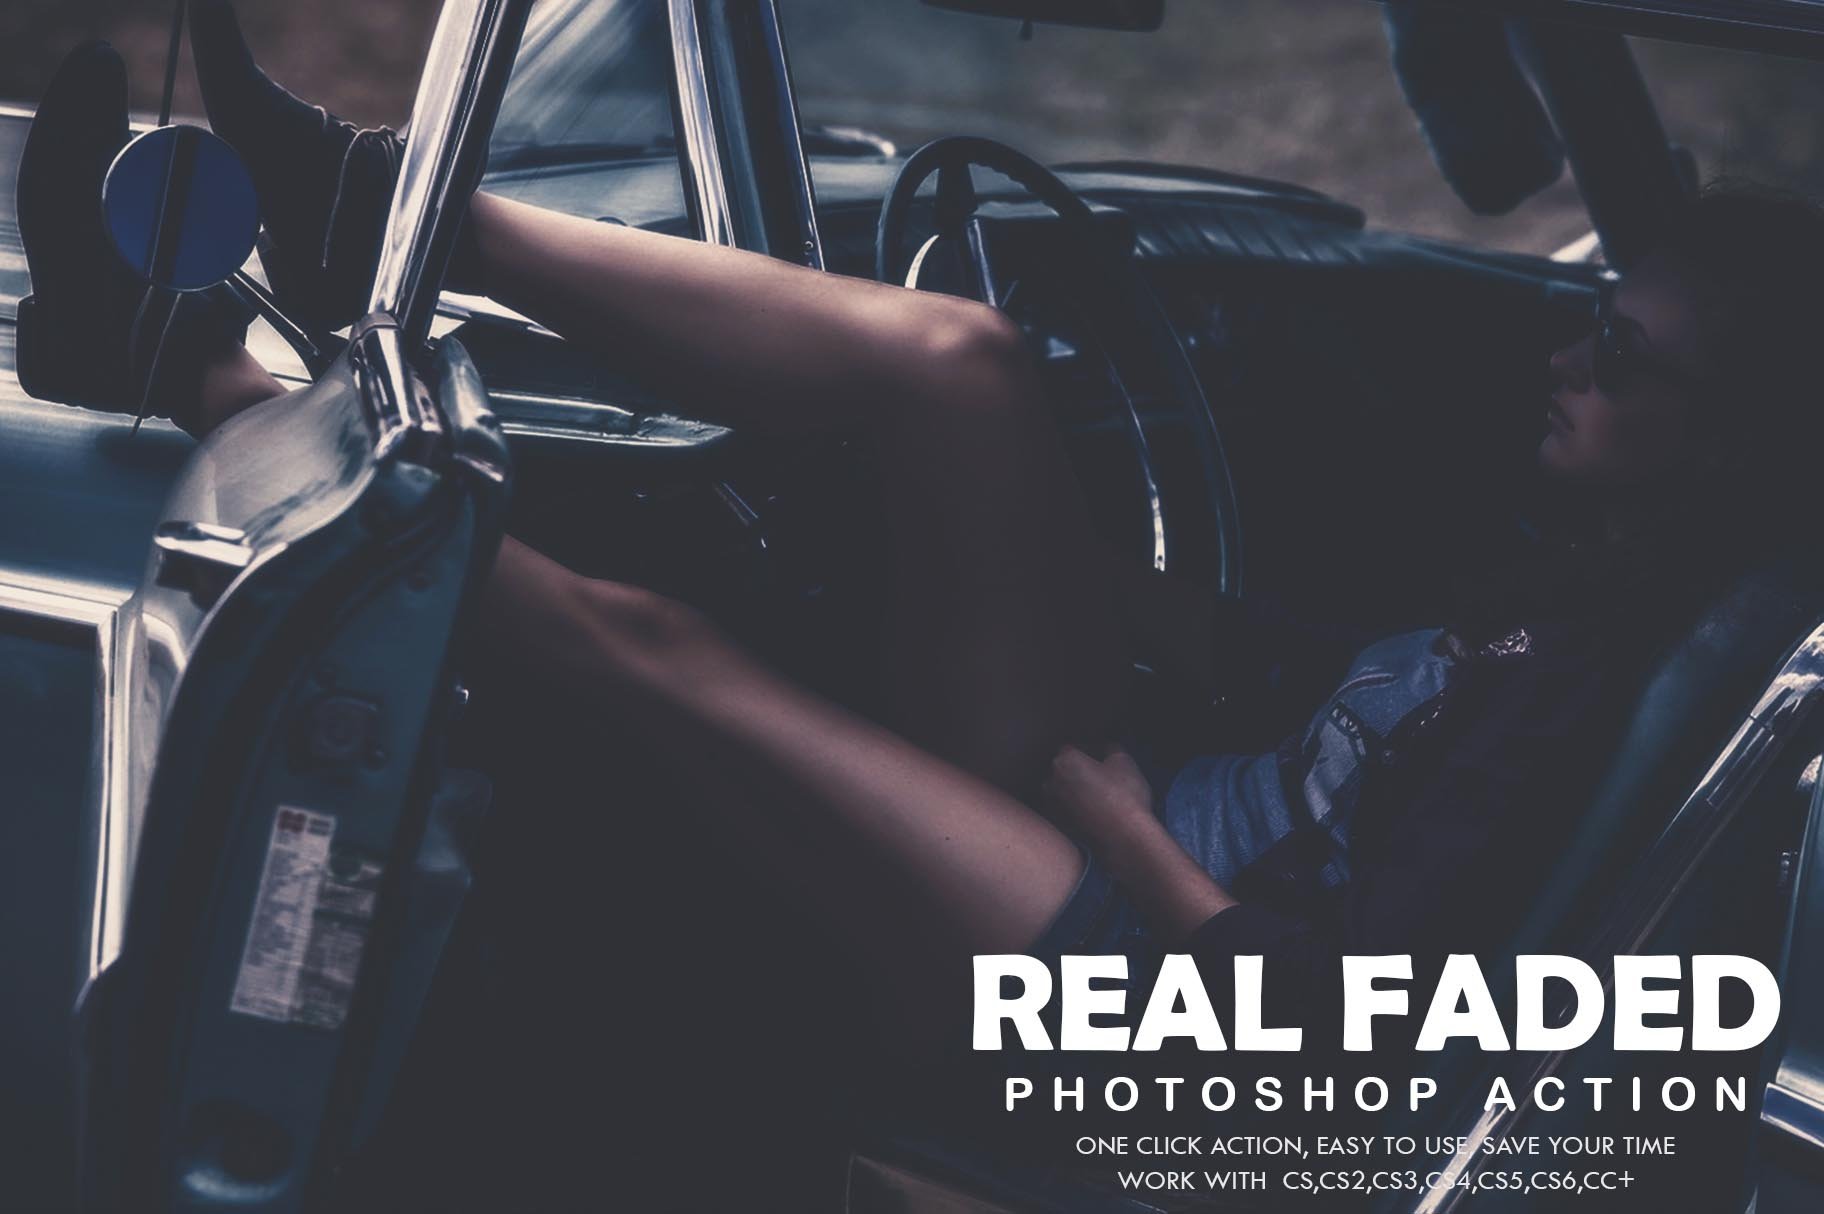 Real Faded Photoshop Actioncover image.